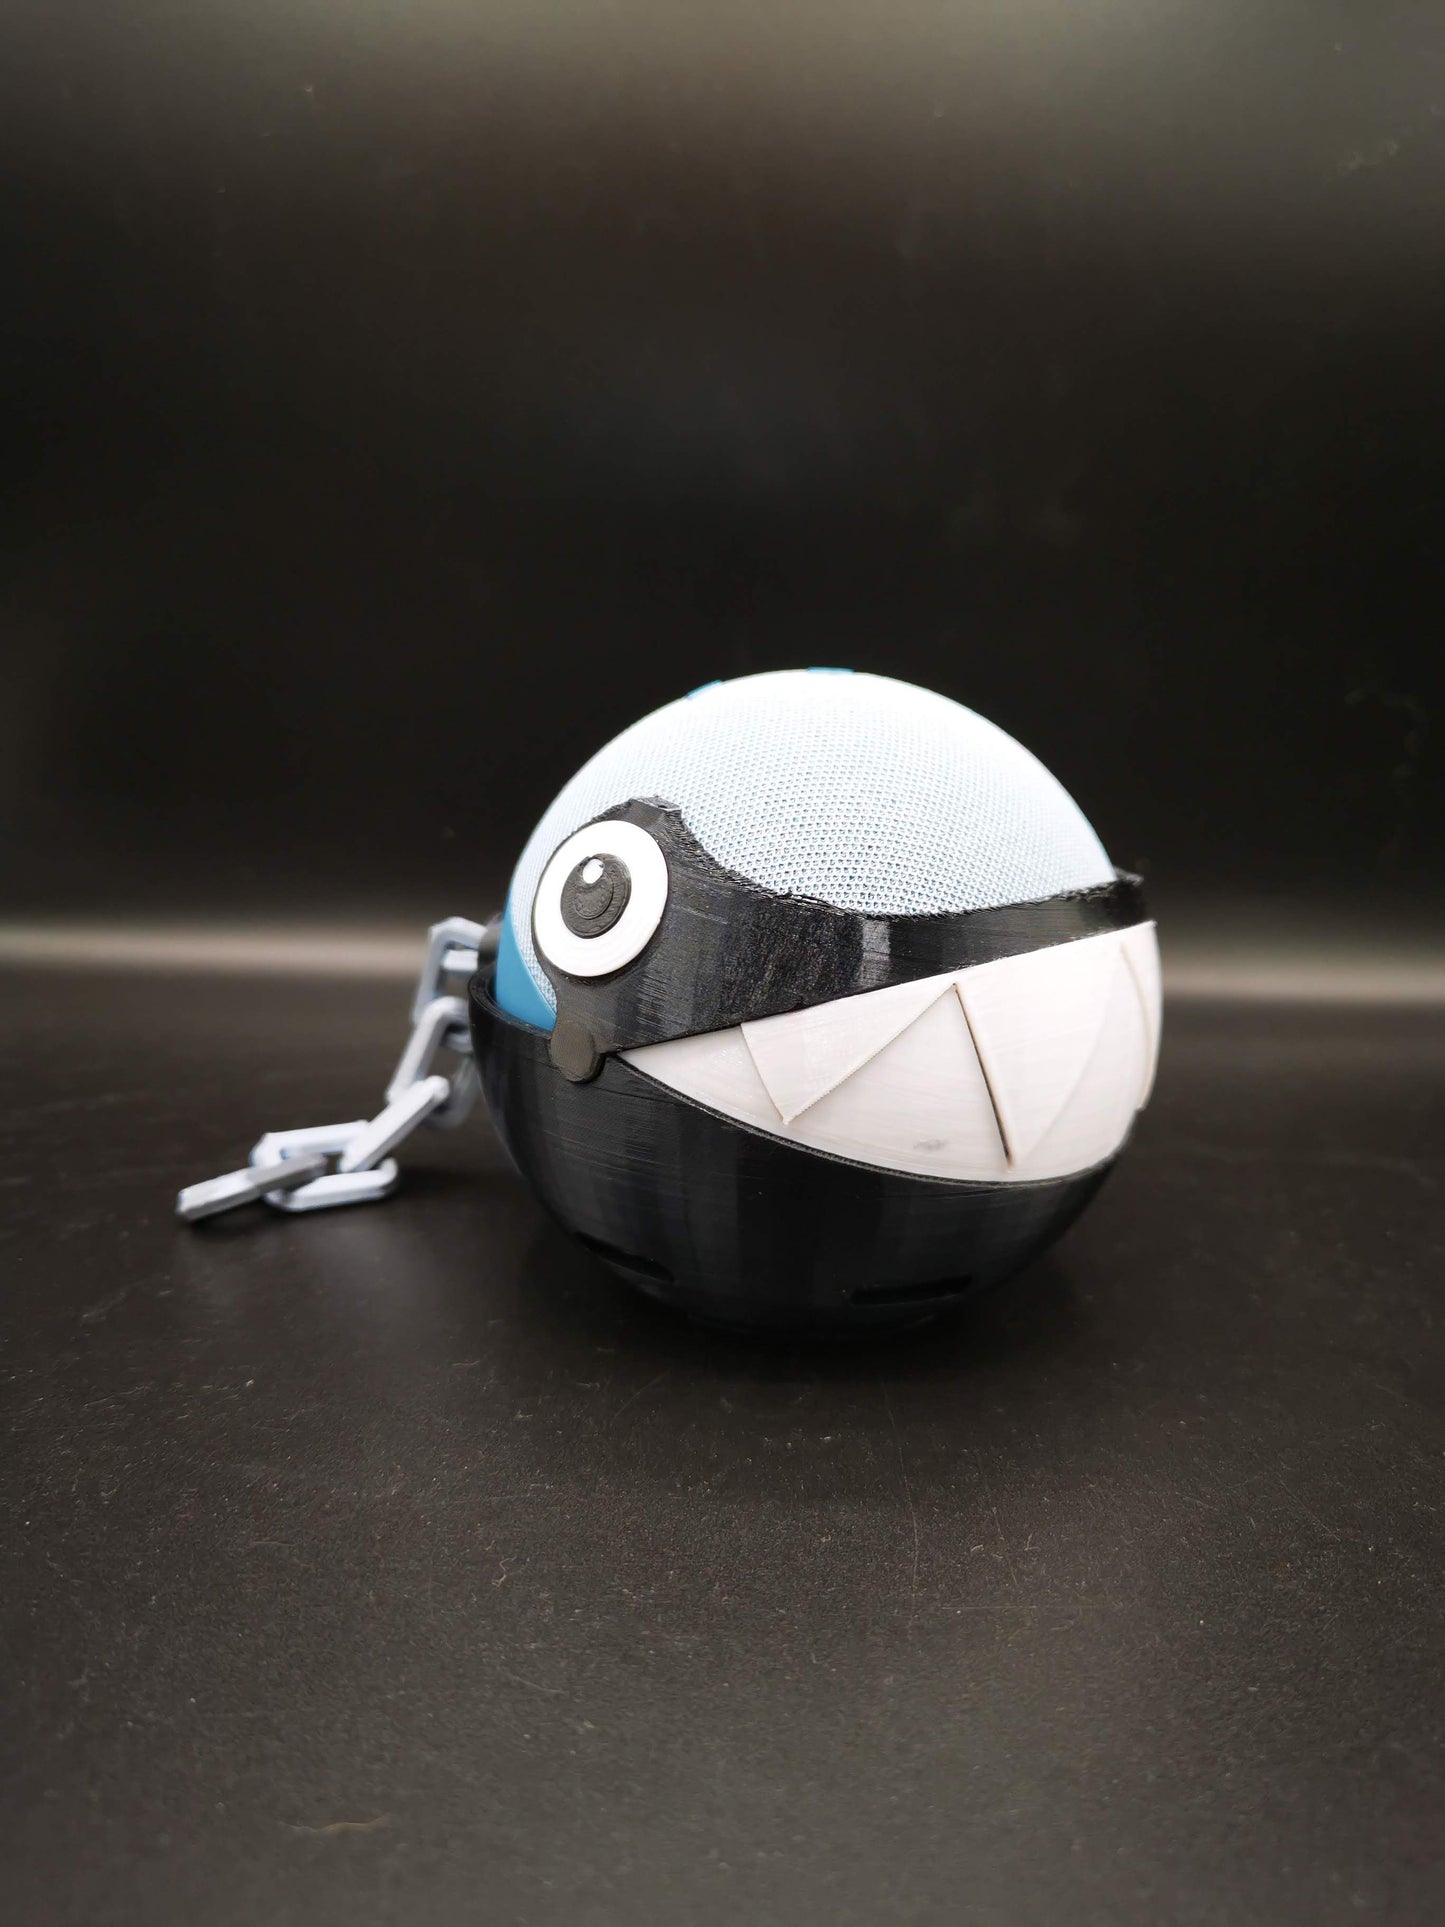 Chain Chomp Alexa Echo holder from a front side angle with mouth closed